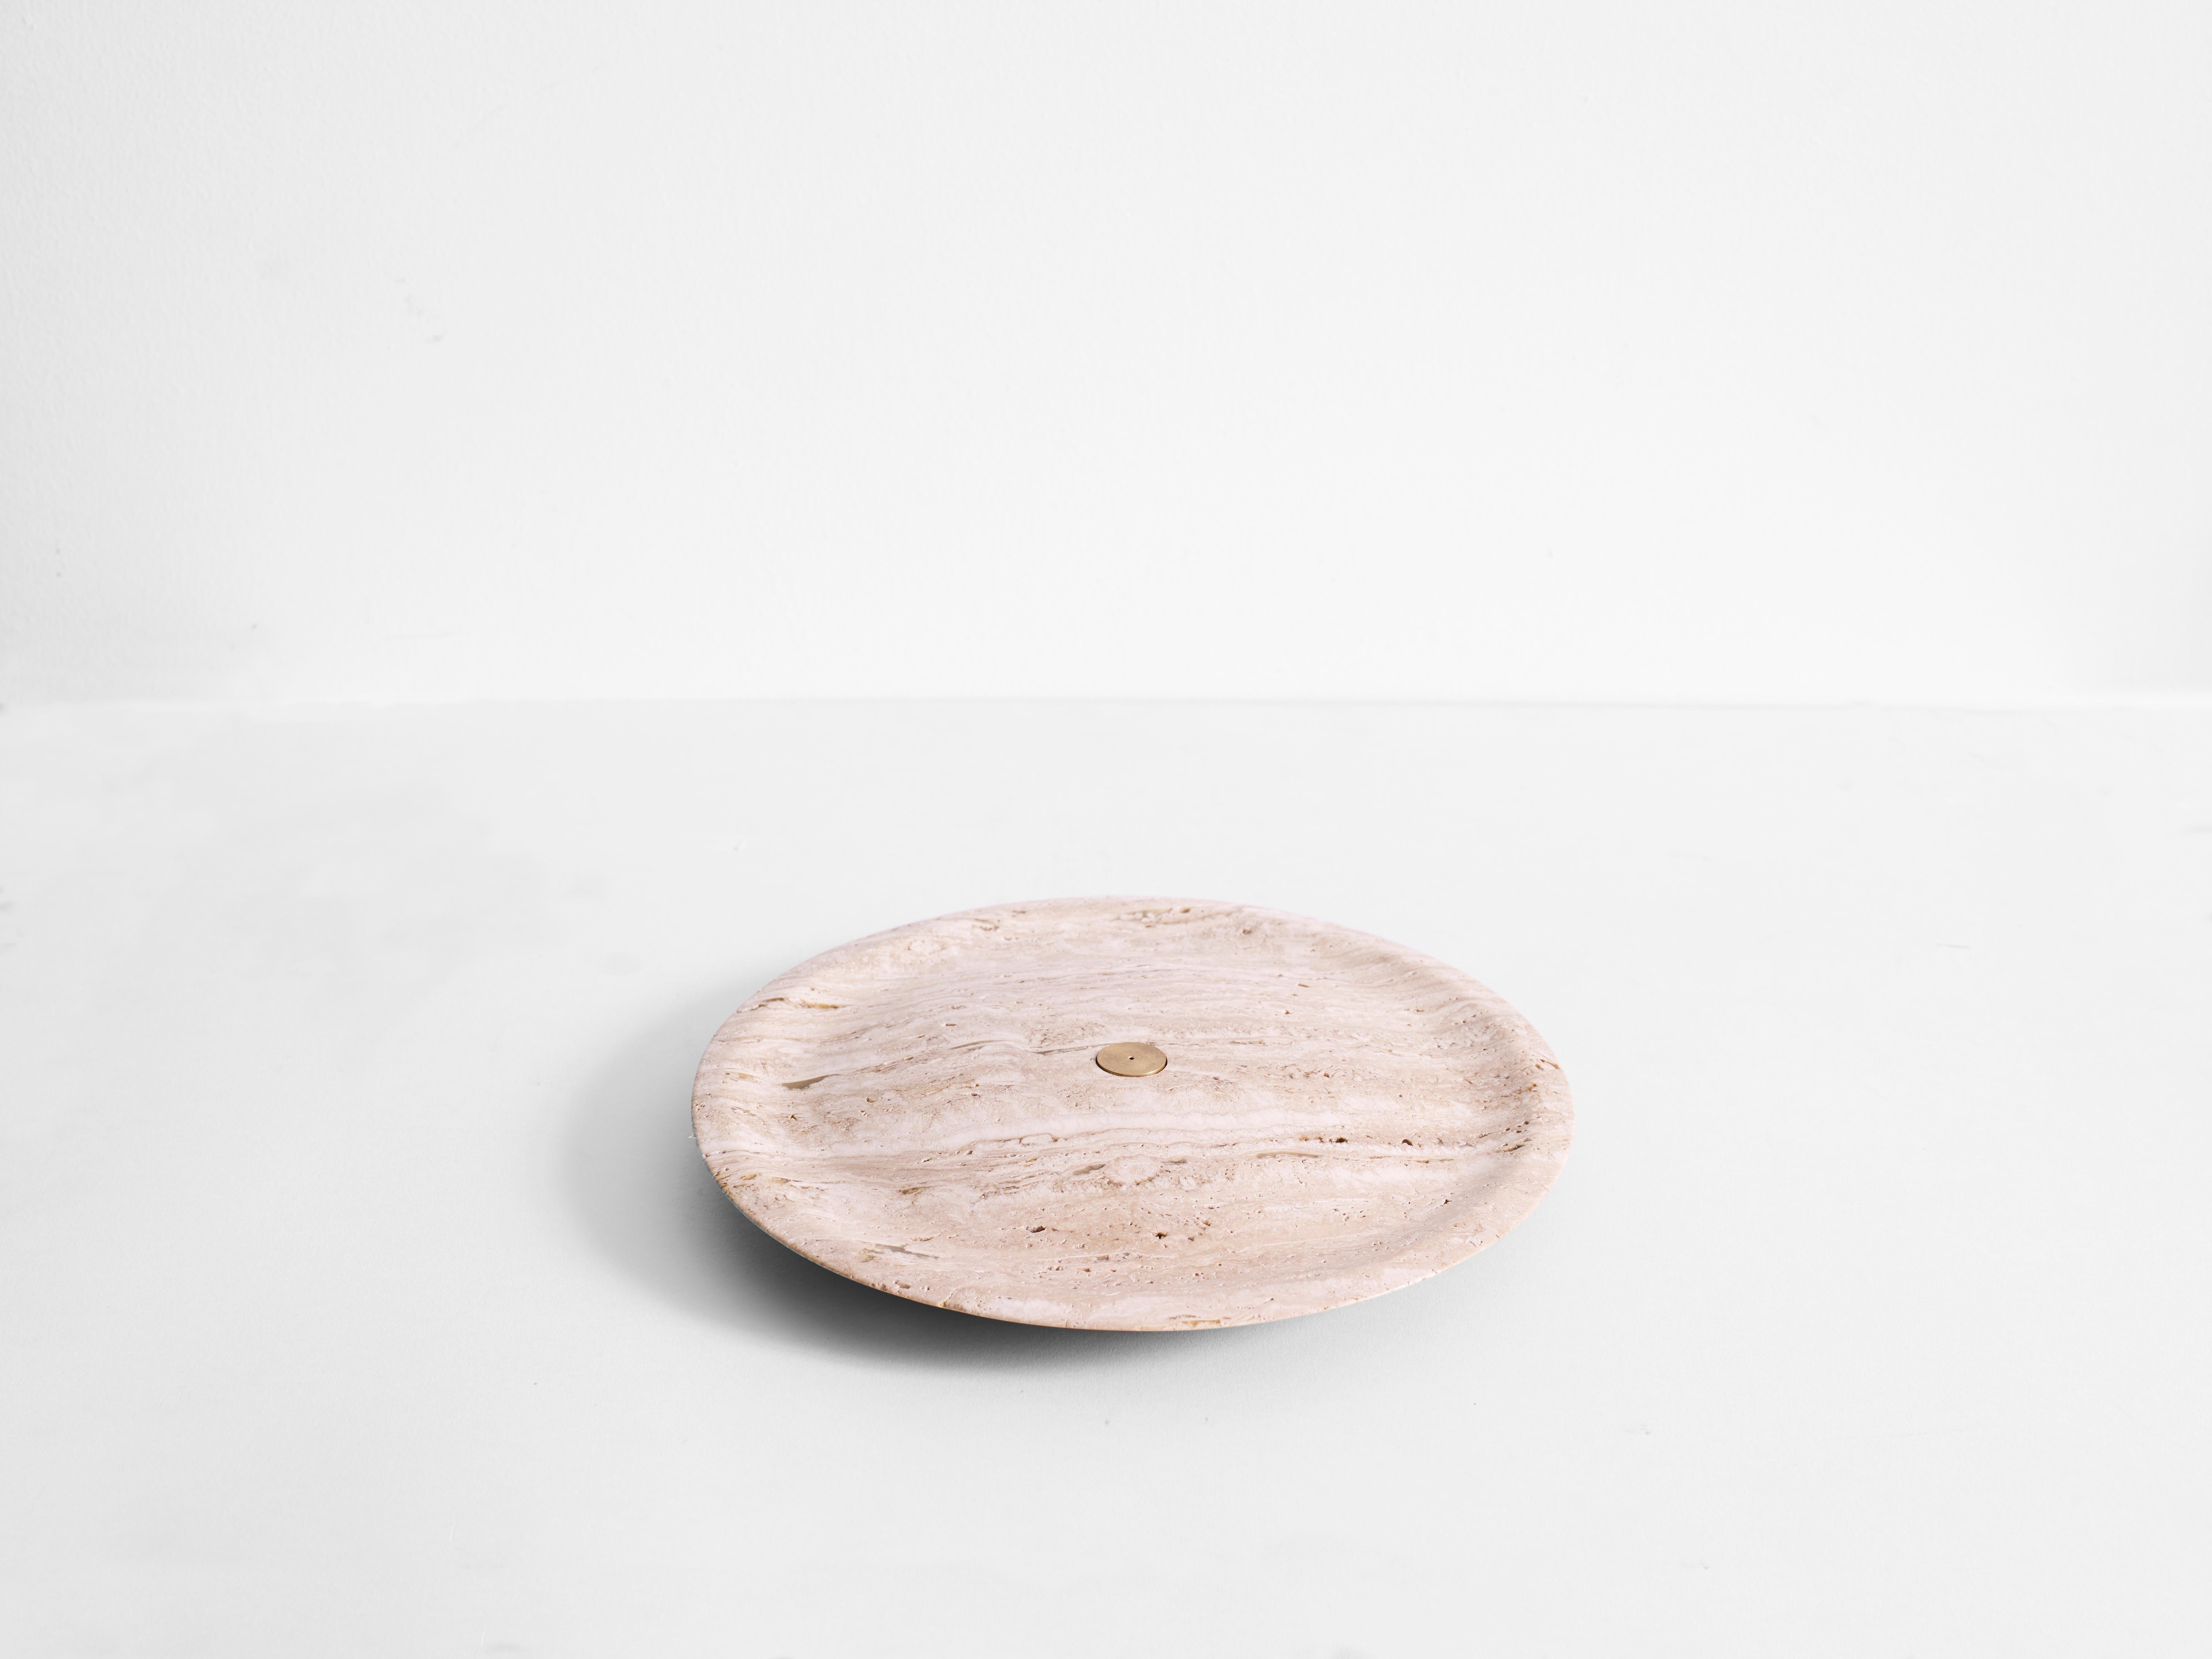 Classico Travertine Incense Plate by Henry Wilson
Dimensions: D 28 x H 4 cm
Materials: Travertine

The incense plate is carved from solid green Guatemala marble and uses a central brass insert to hold incense sticks. The insert is double sided, one